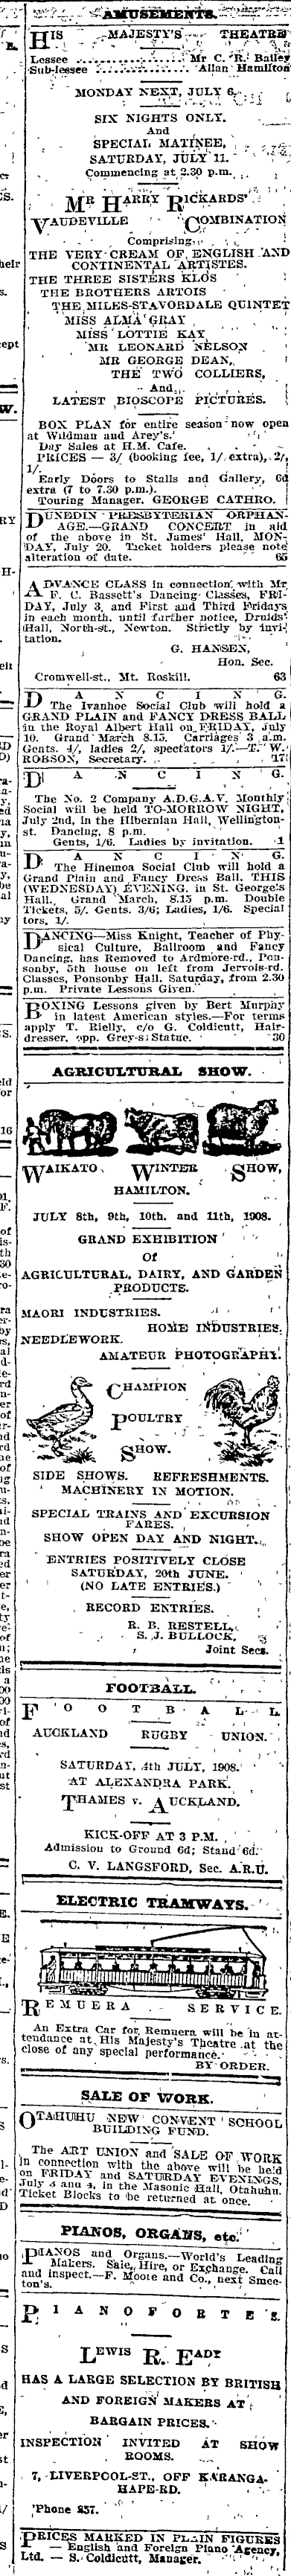 Papers Past | Newspapers | Auckland Star | 1 July 1908 | Page 12 